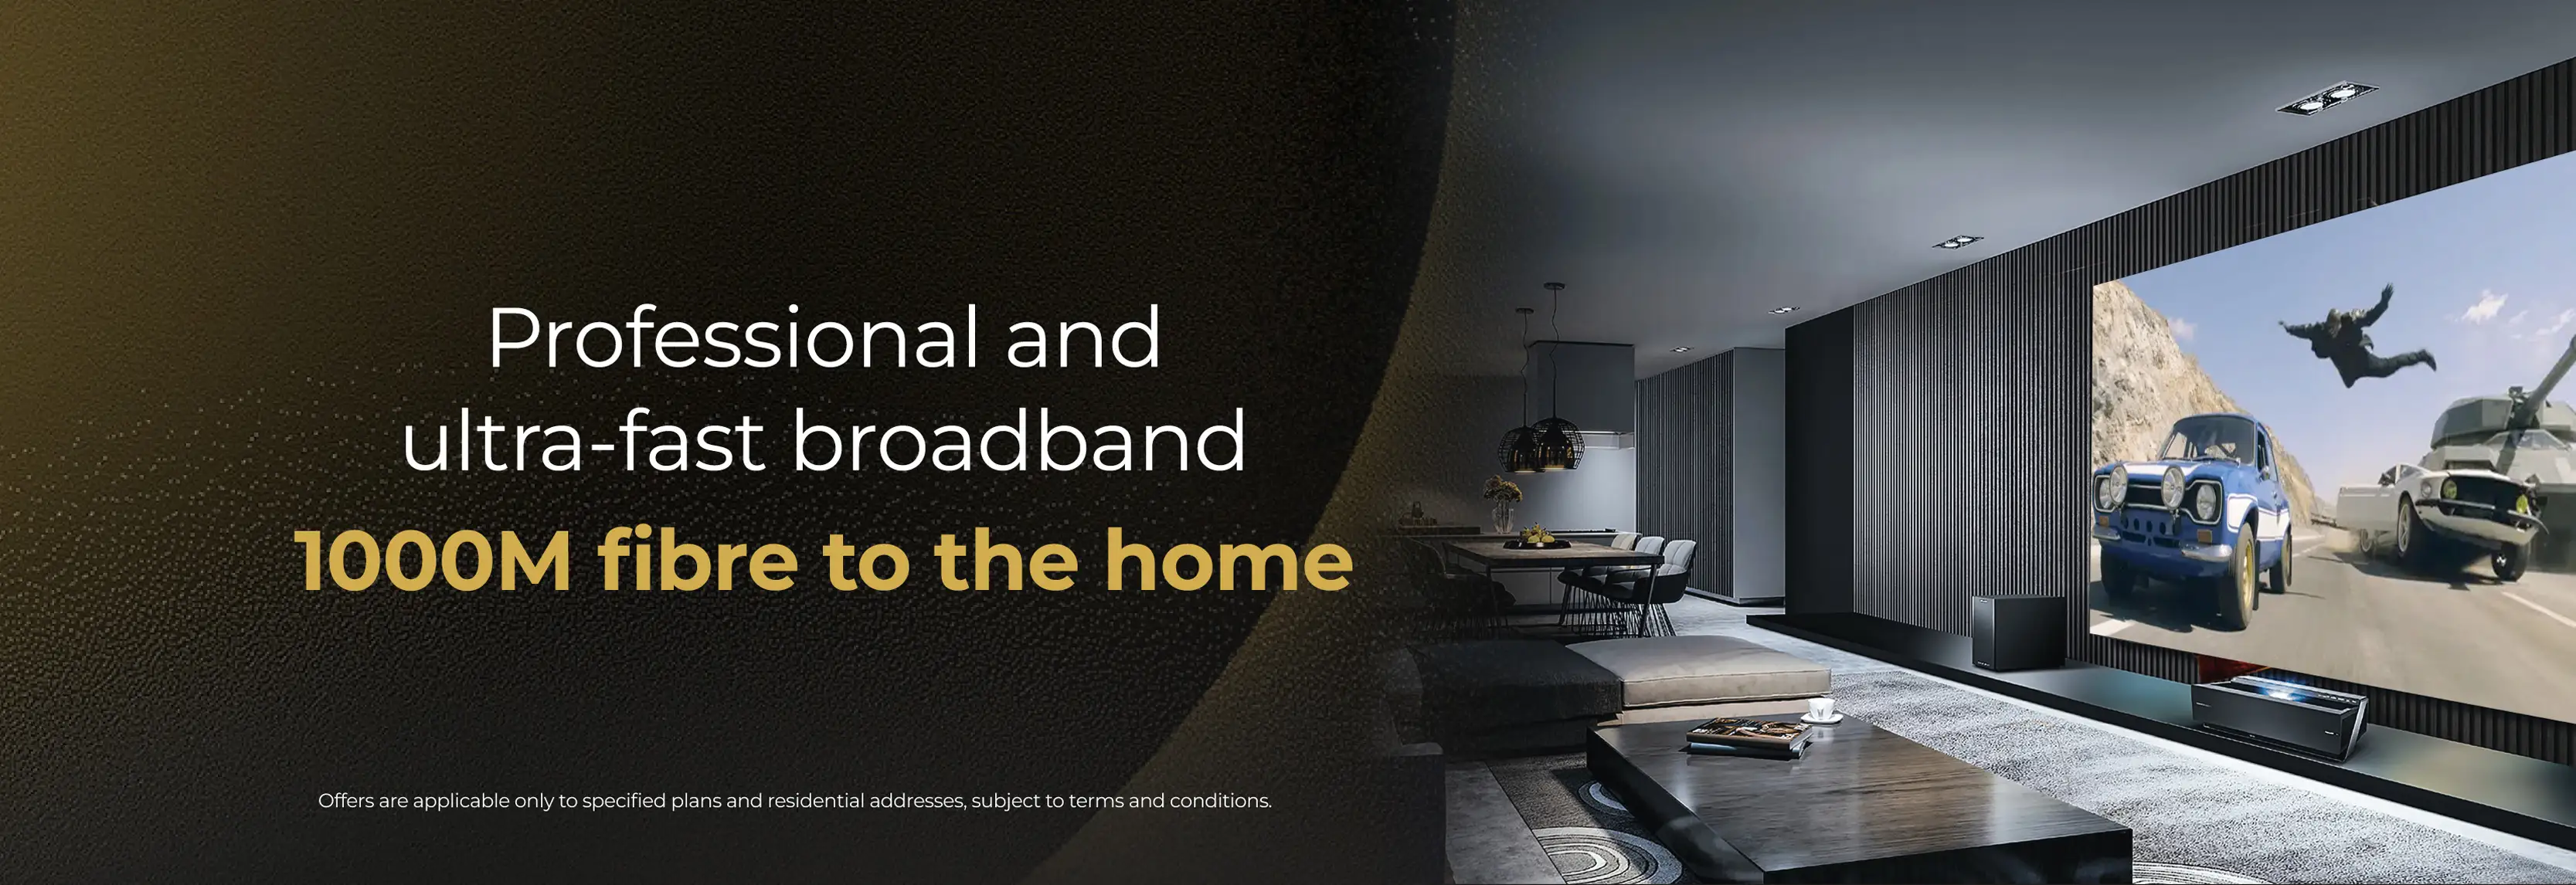 Professional and ultra-fast broadband 1000M fibre to the home